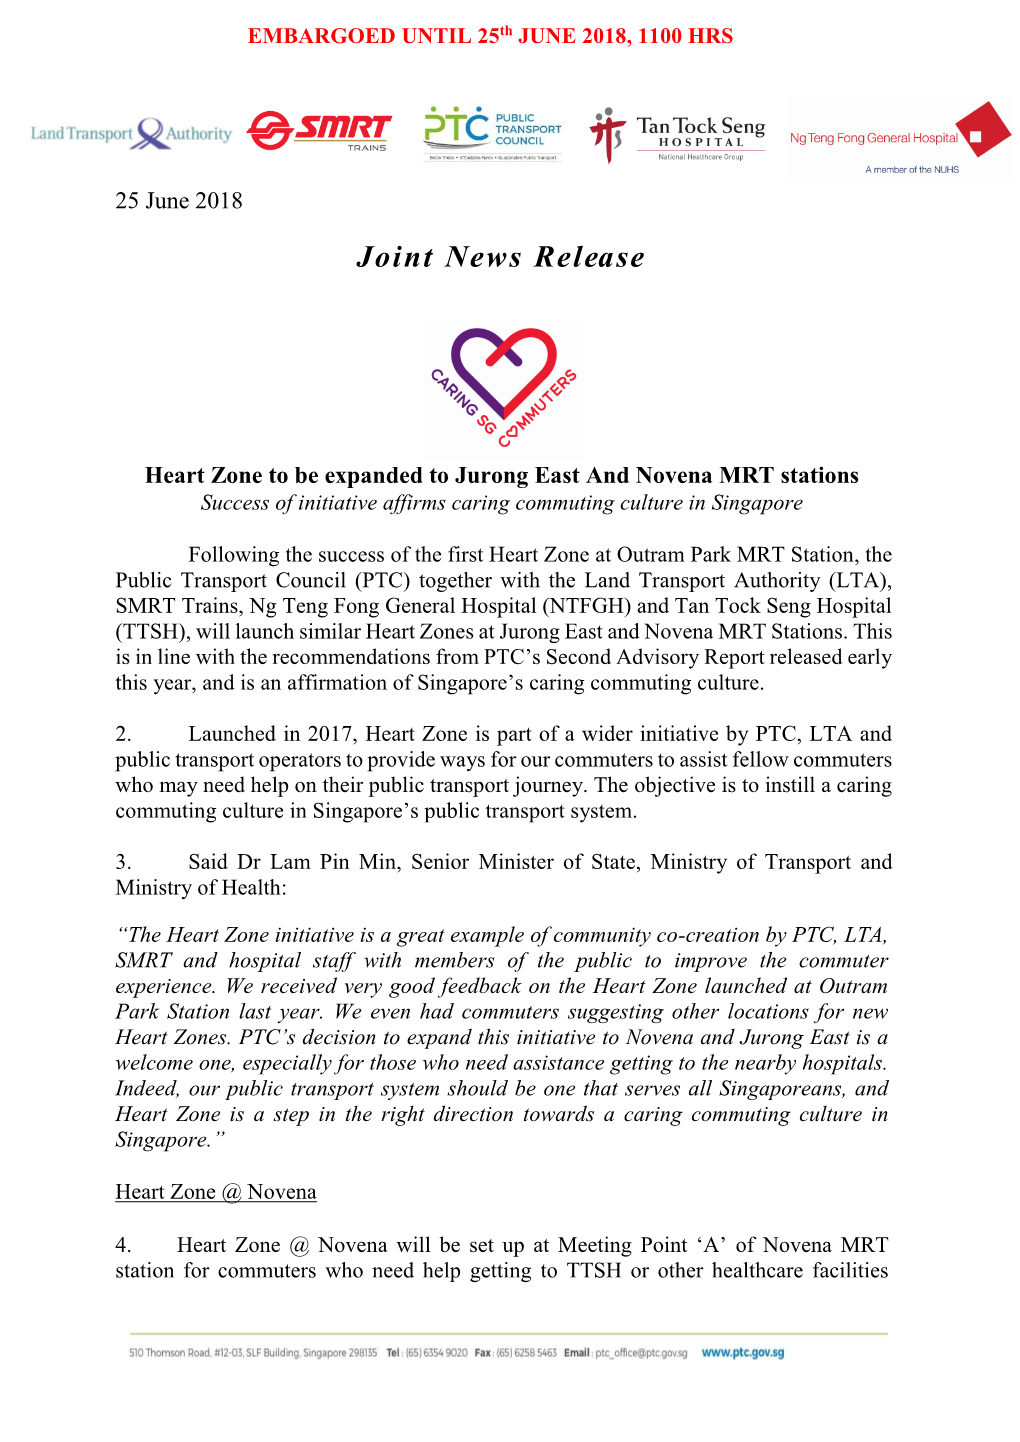 Joint News Release